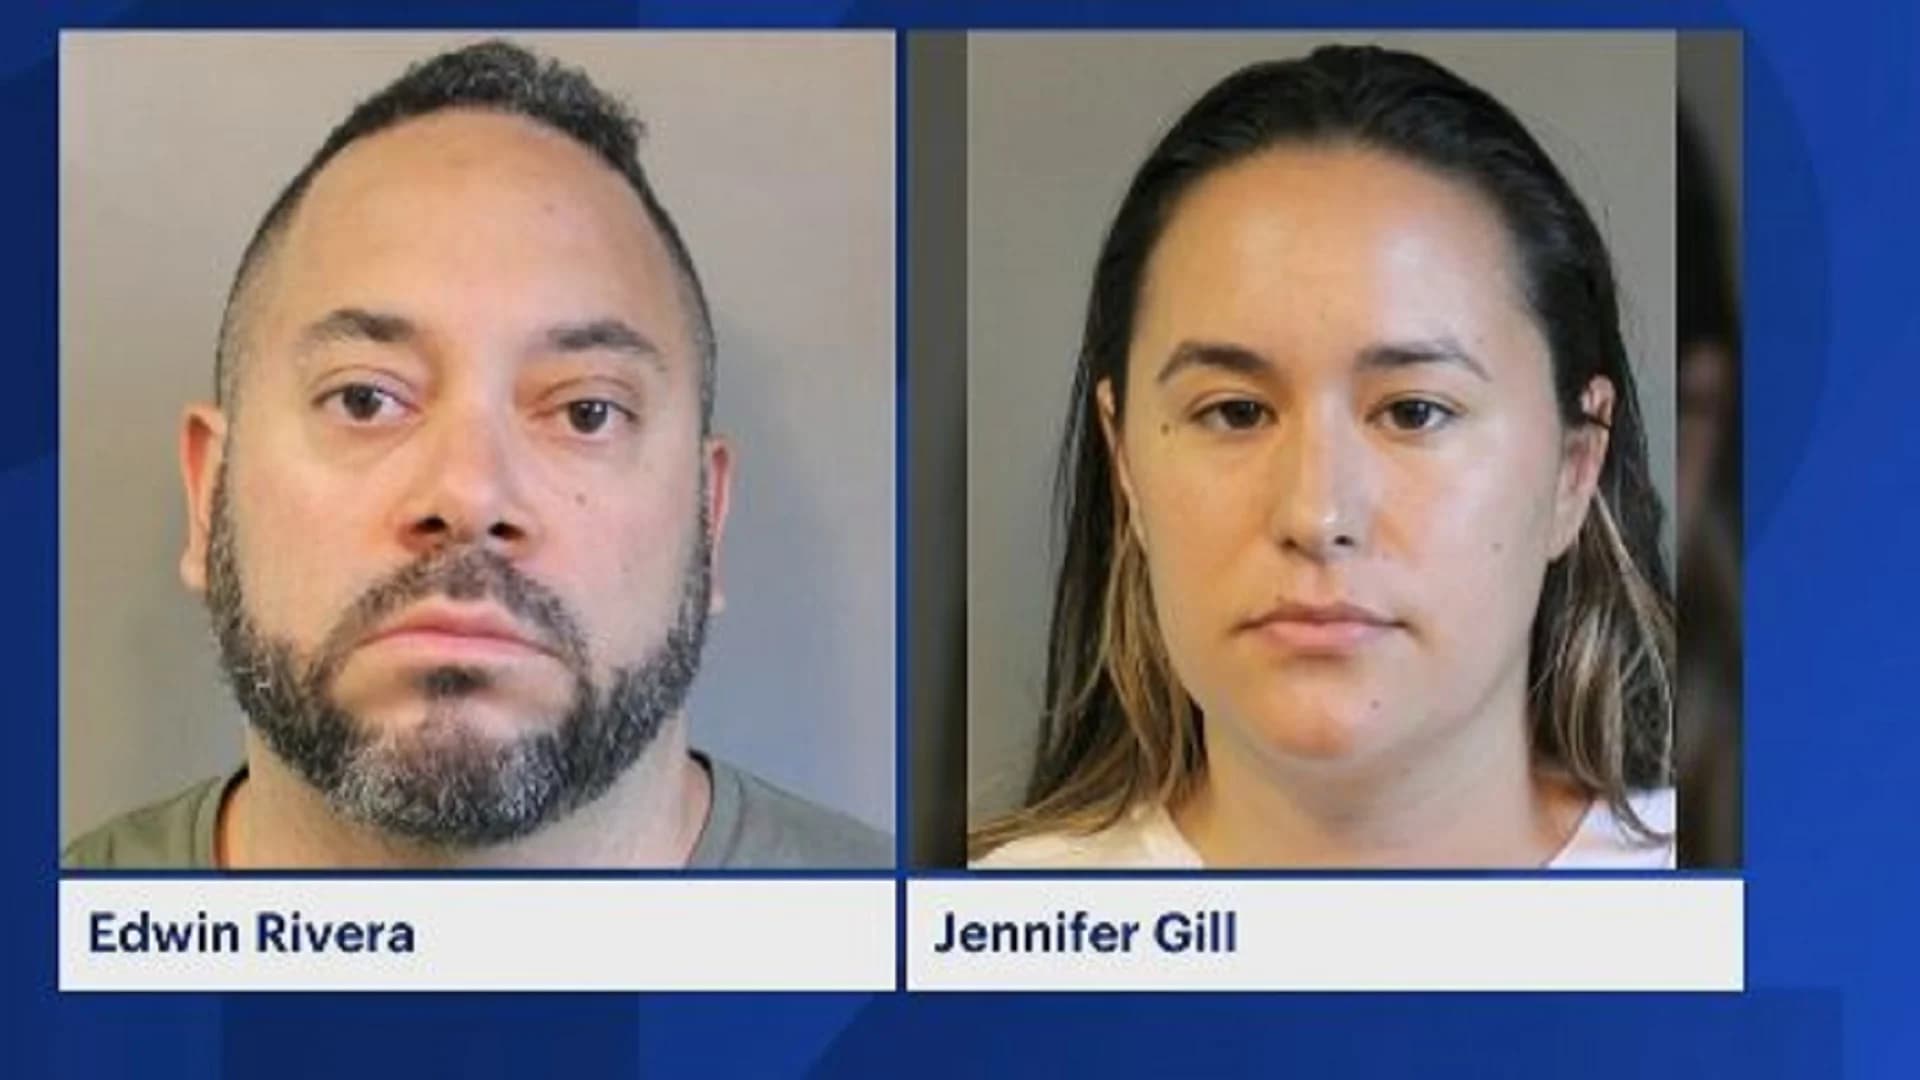 Police: 2 arrested for burglarizing Red Roof Inn in Westbury 